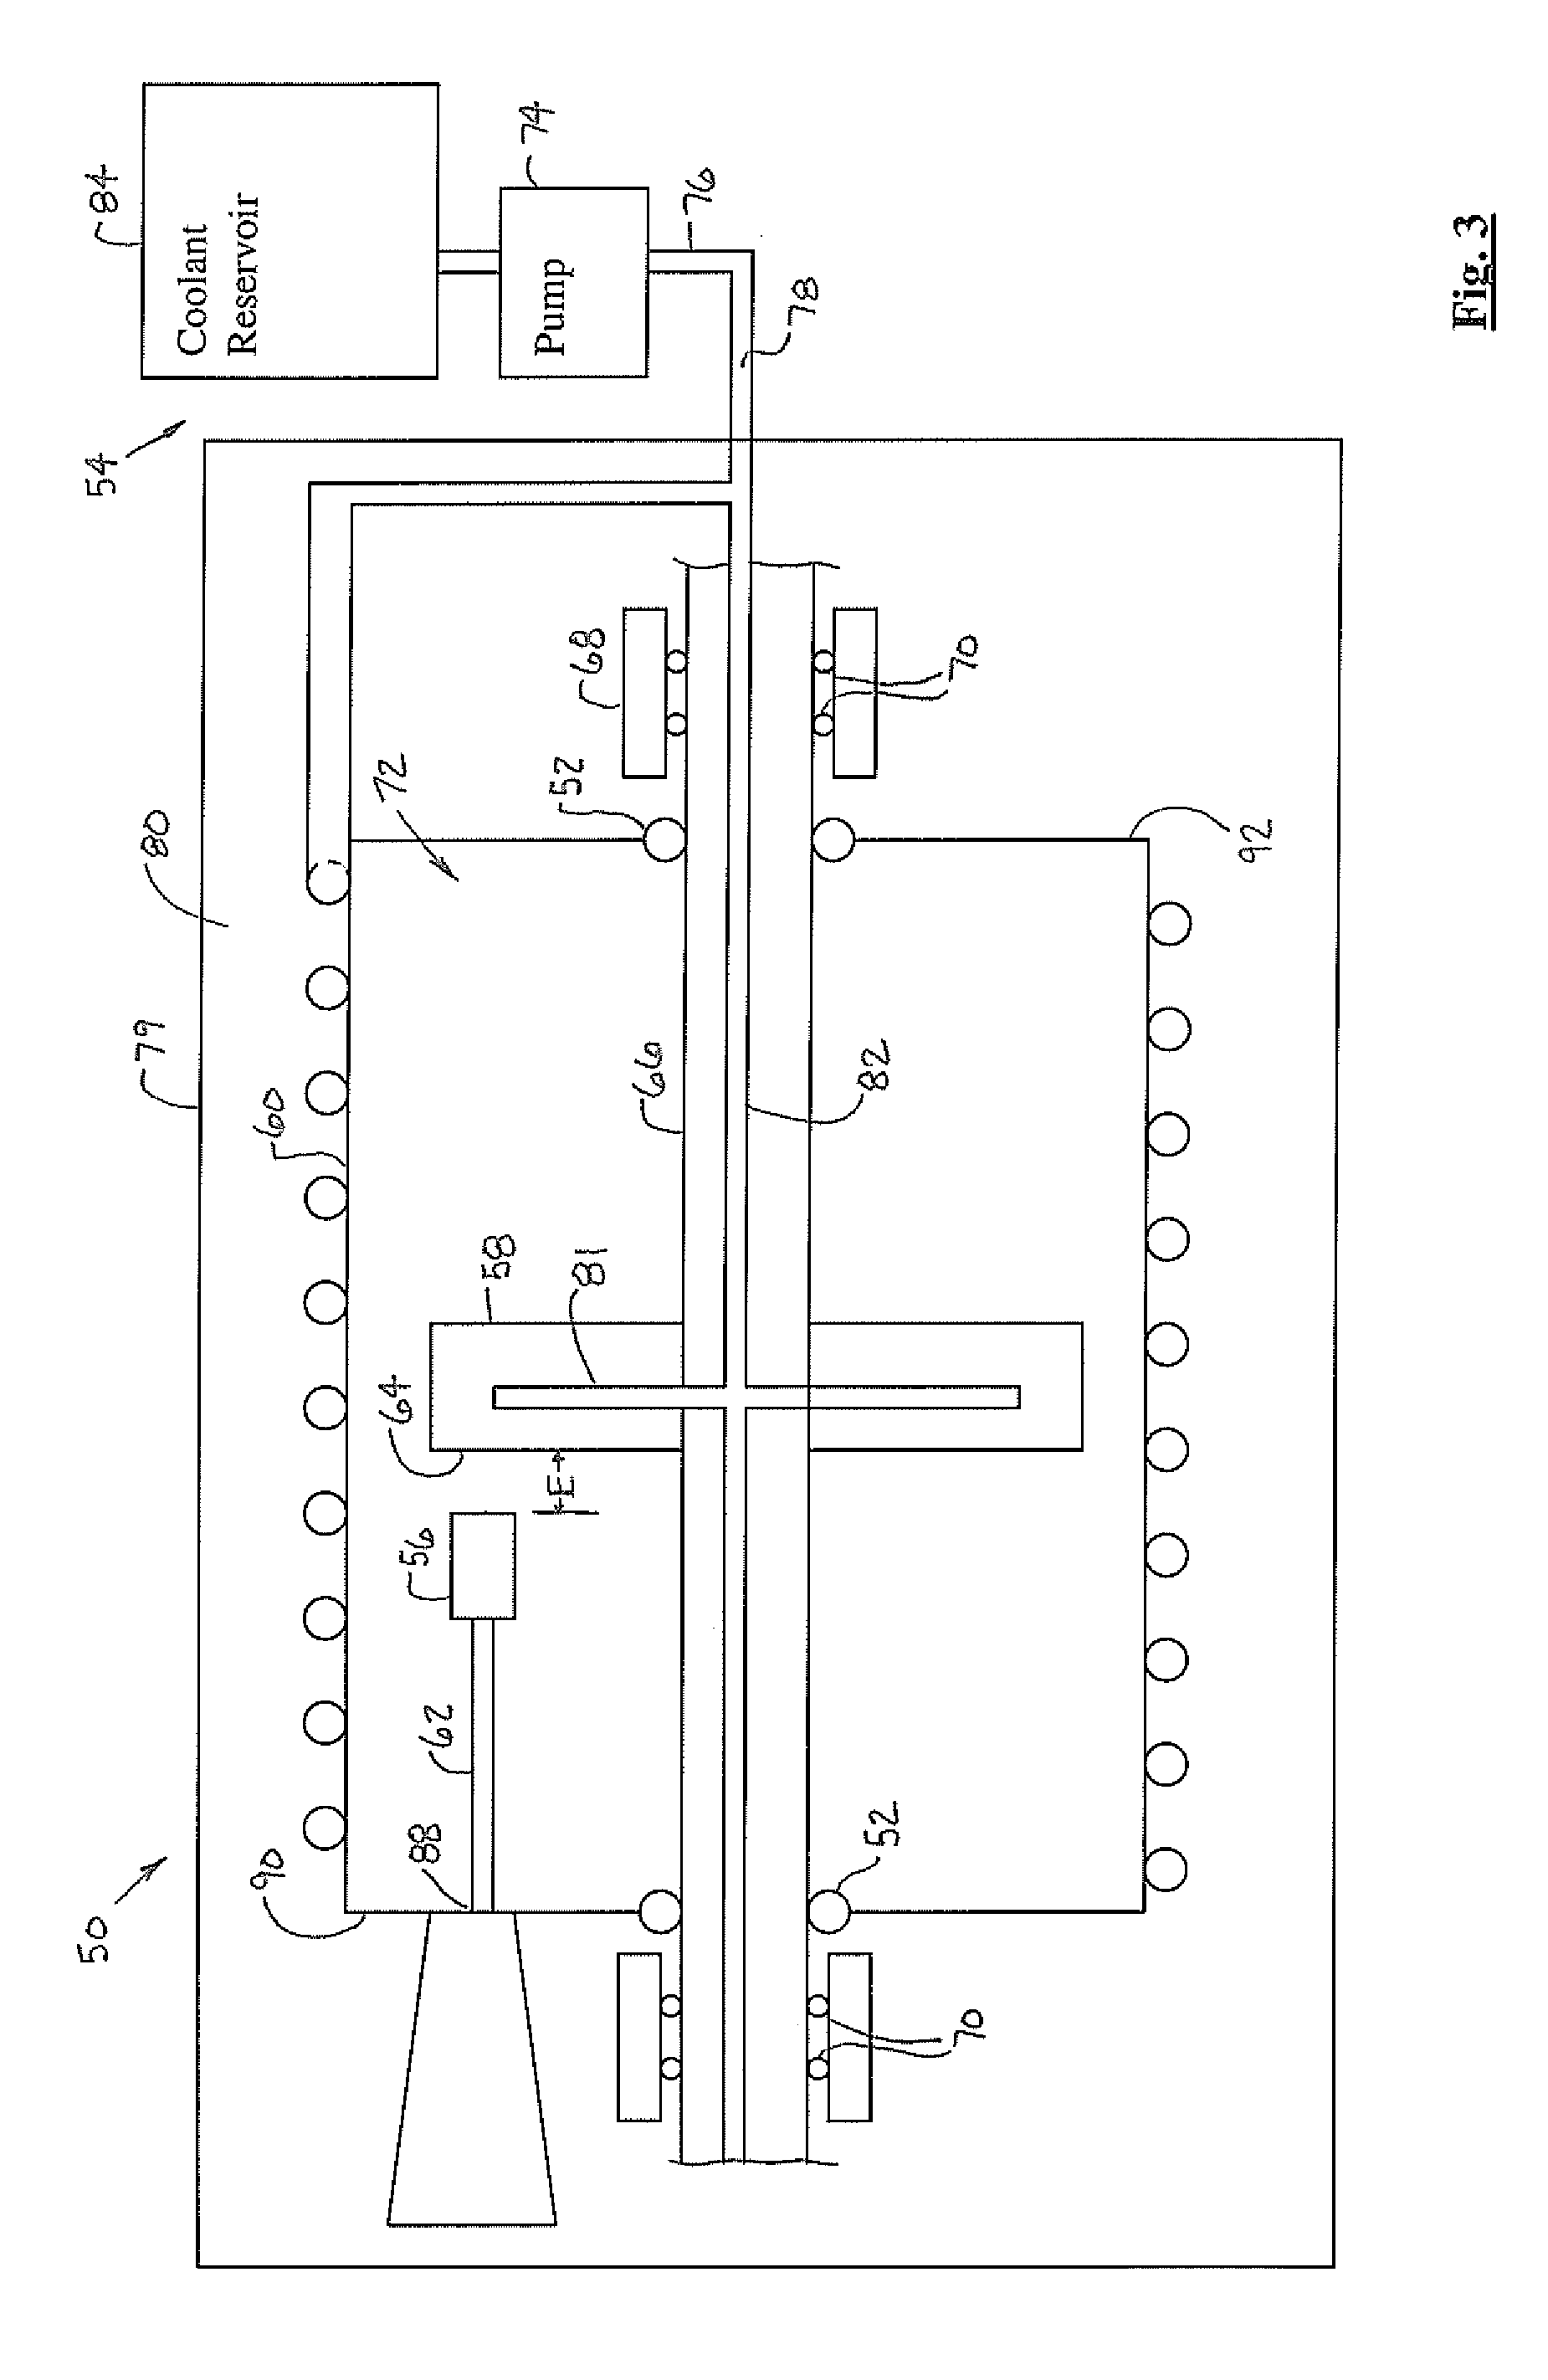 Cantilever and straddle x-ray tube configurations for a rotating anode with vacuum transition chambers